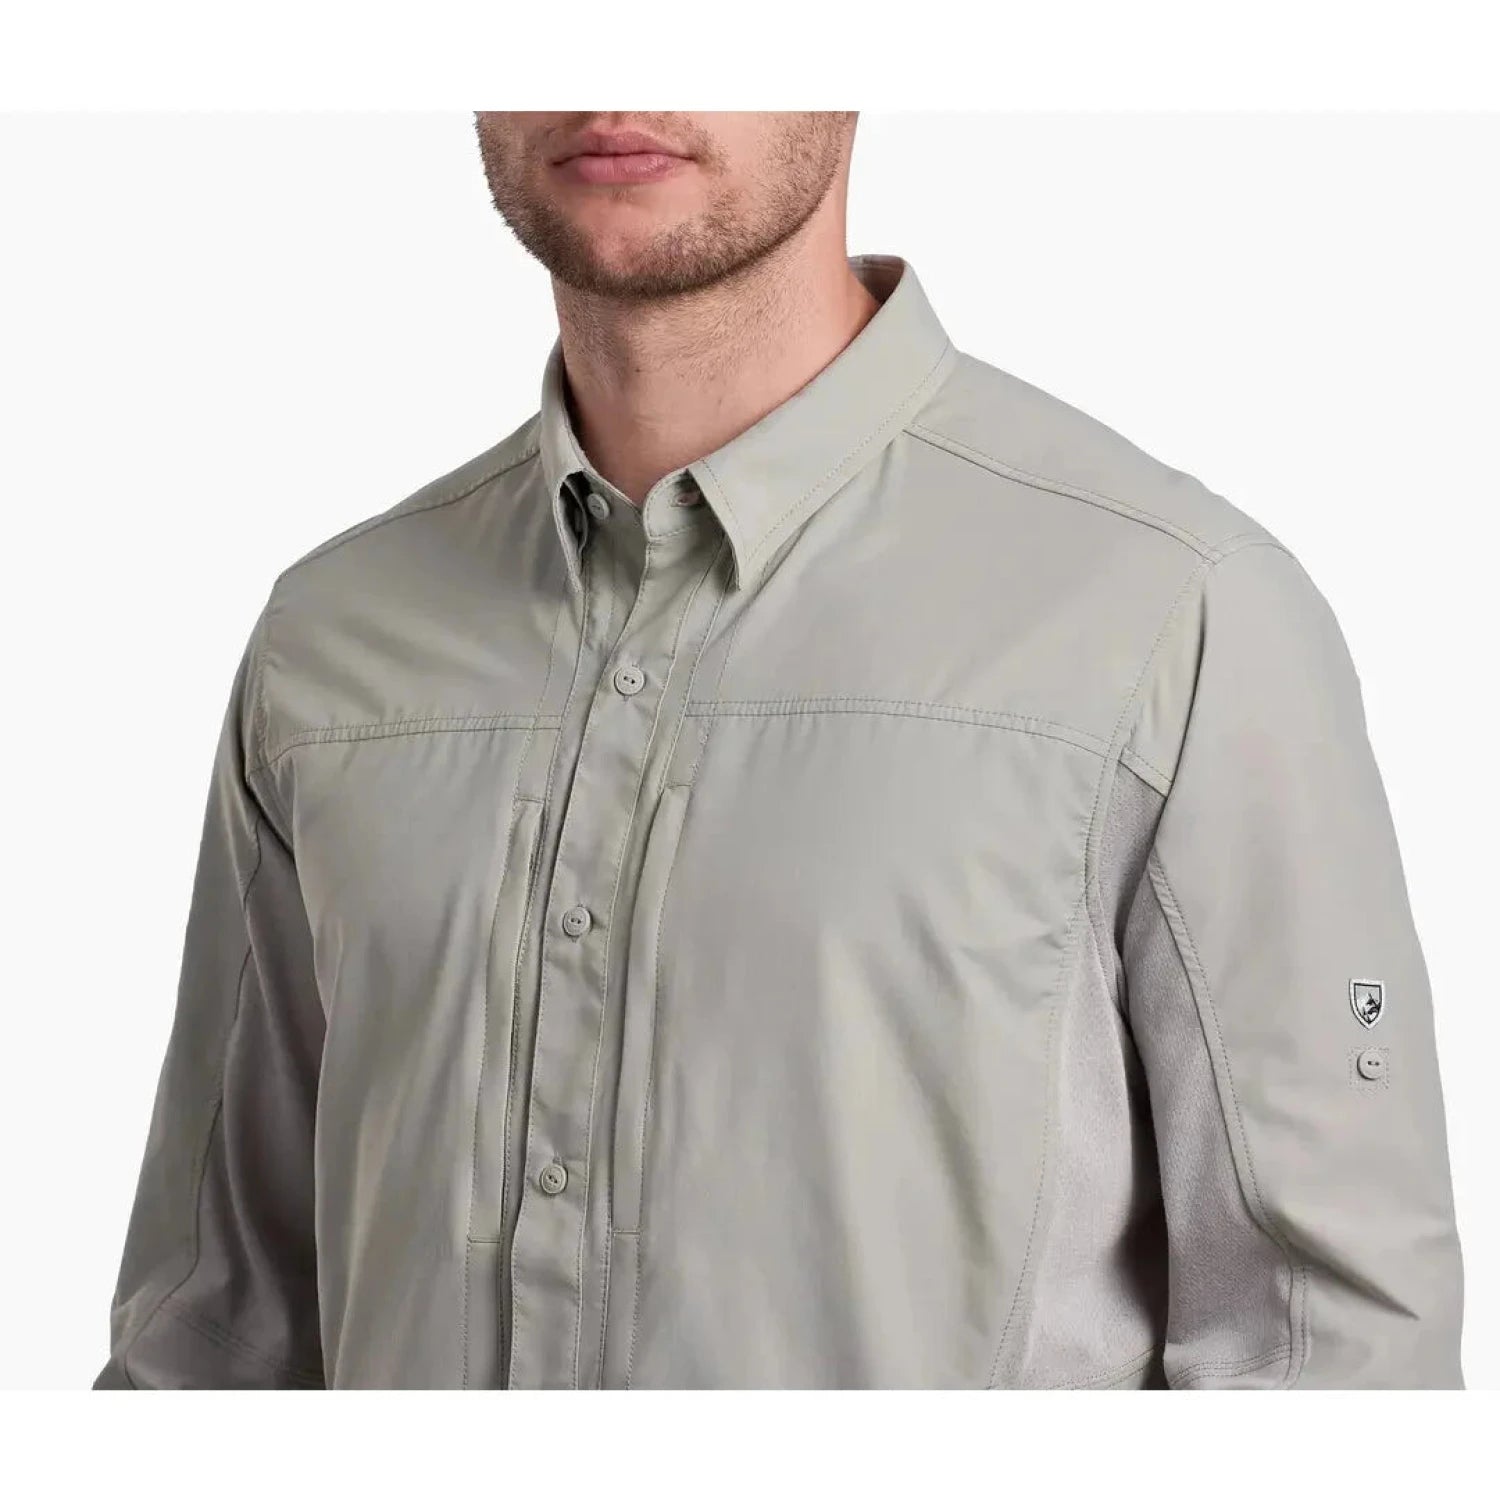 KÜHL Men's AIRSPEED™ Shirt shown in the Cloud Gray color option. Front neck view.